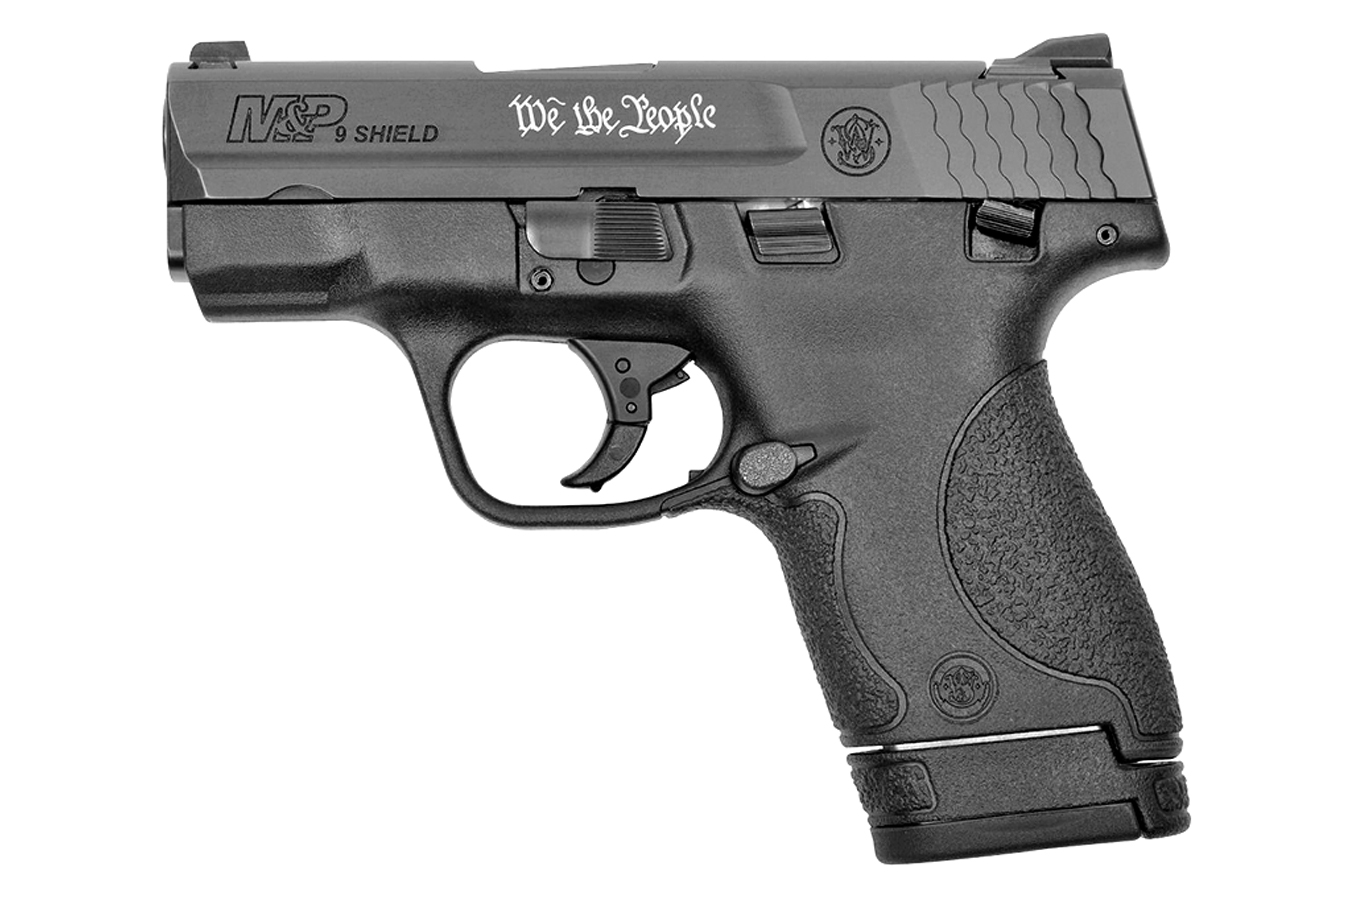 SMITH AND WESSON MP 9MM SHIELD ENGRAVED “WE THE PEOPLE”